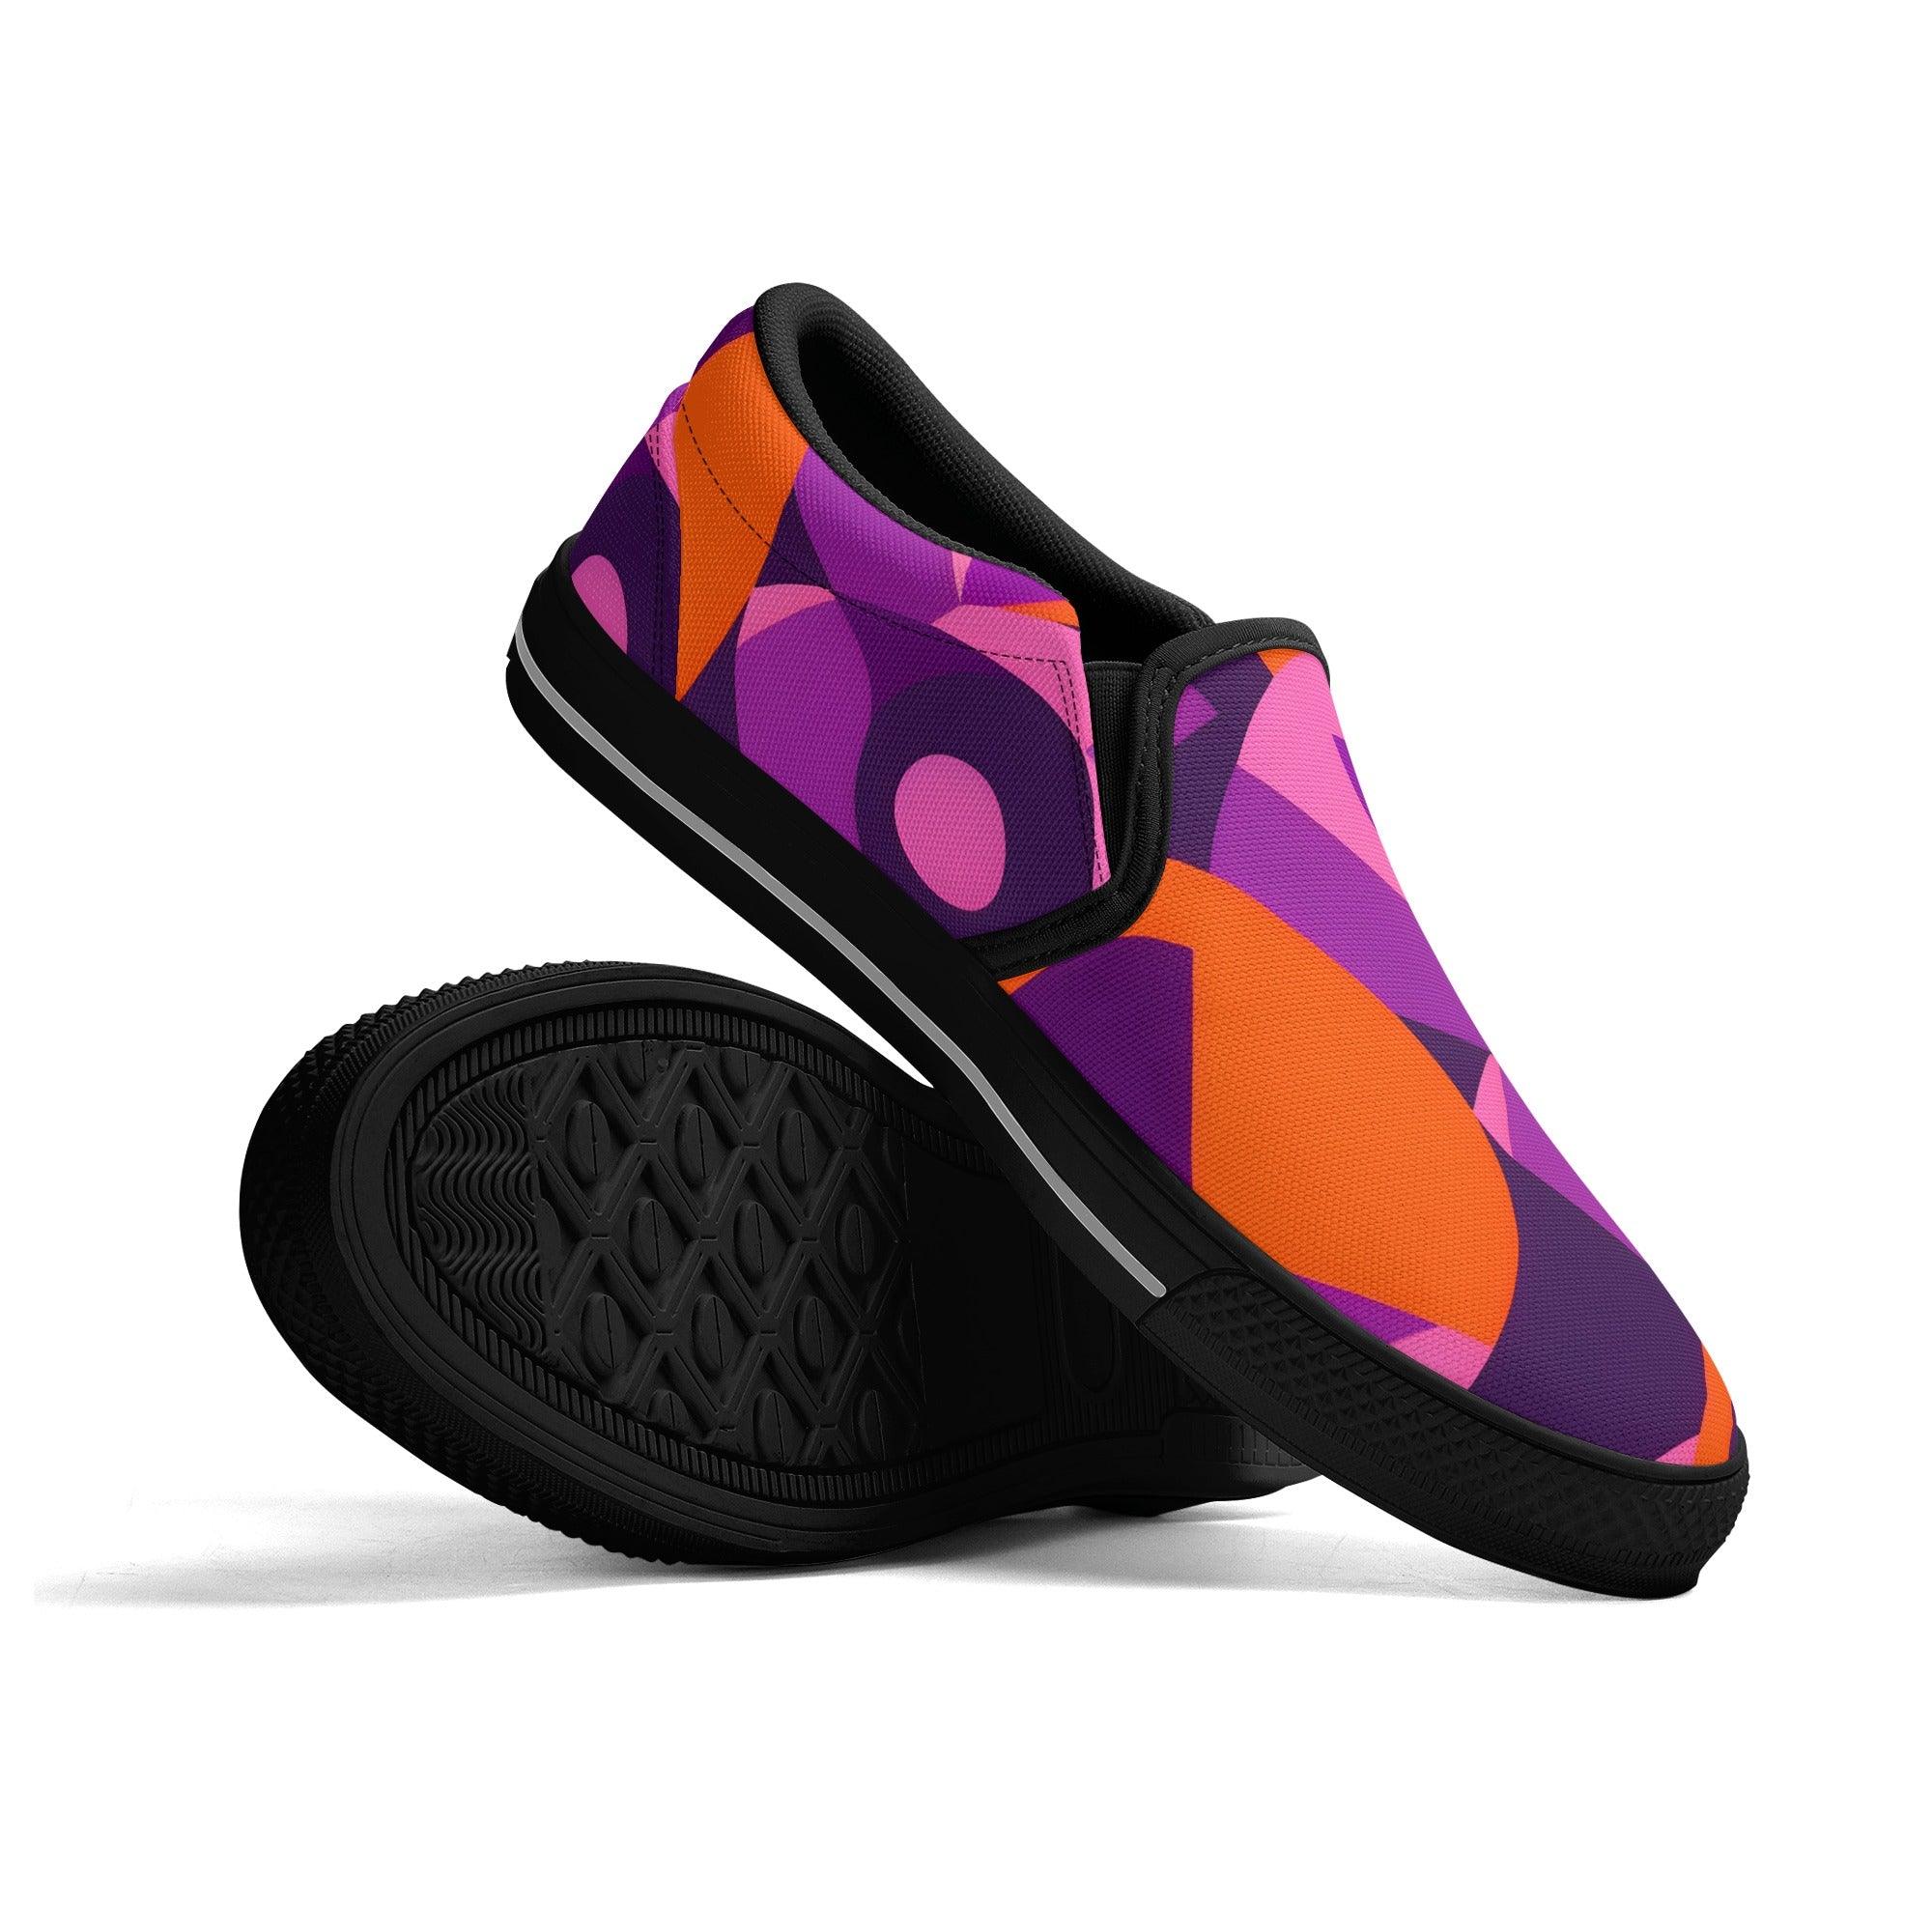 Ailrine Series 239 Canvas Slip On Skater Shoes - Abstract Geometric Violet Pink Orange Multicolor Funky Bold Artistic Retro Mod Women's Black Casual Blissfully Brand